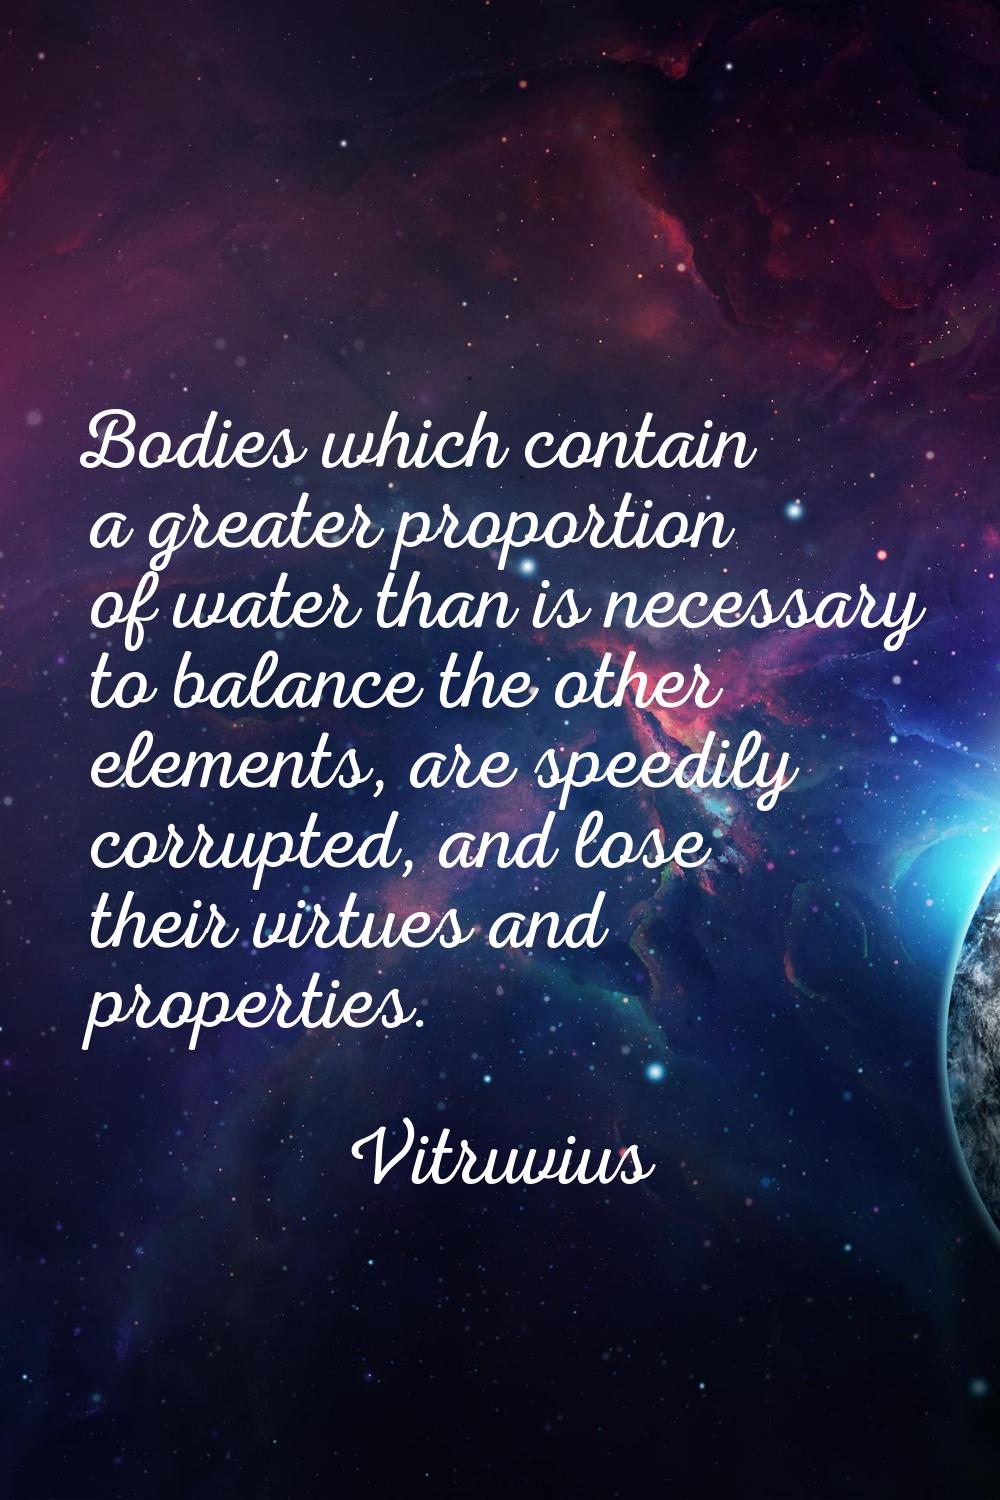 Bodies which contain a greater proportion of water than is necessary to balance the other elements,